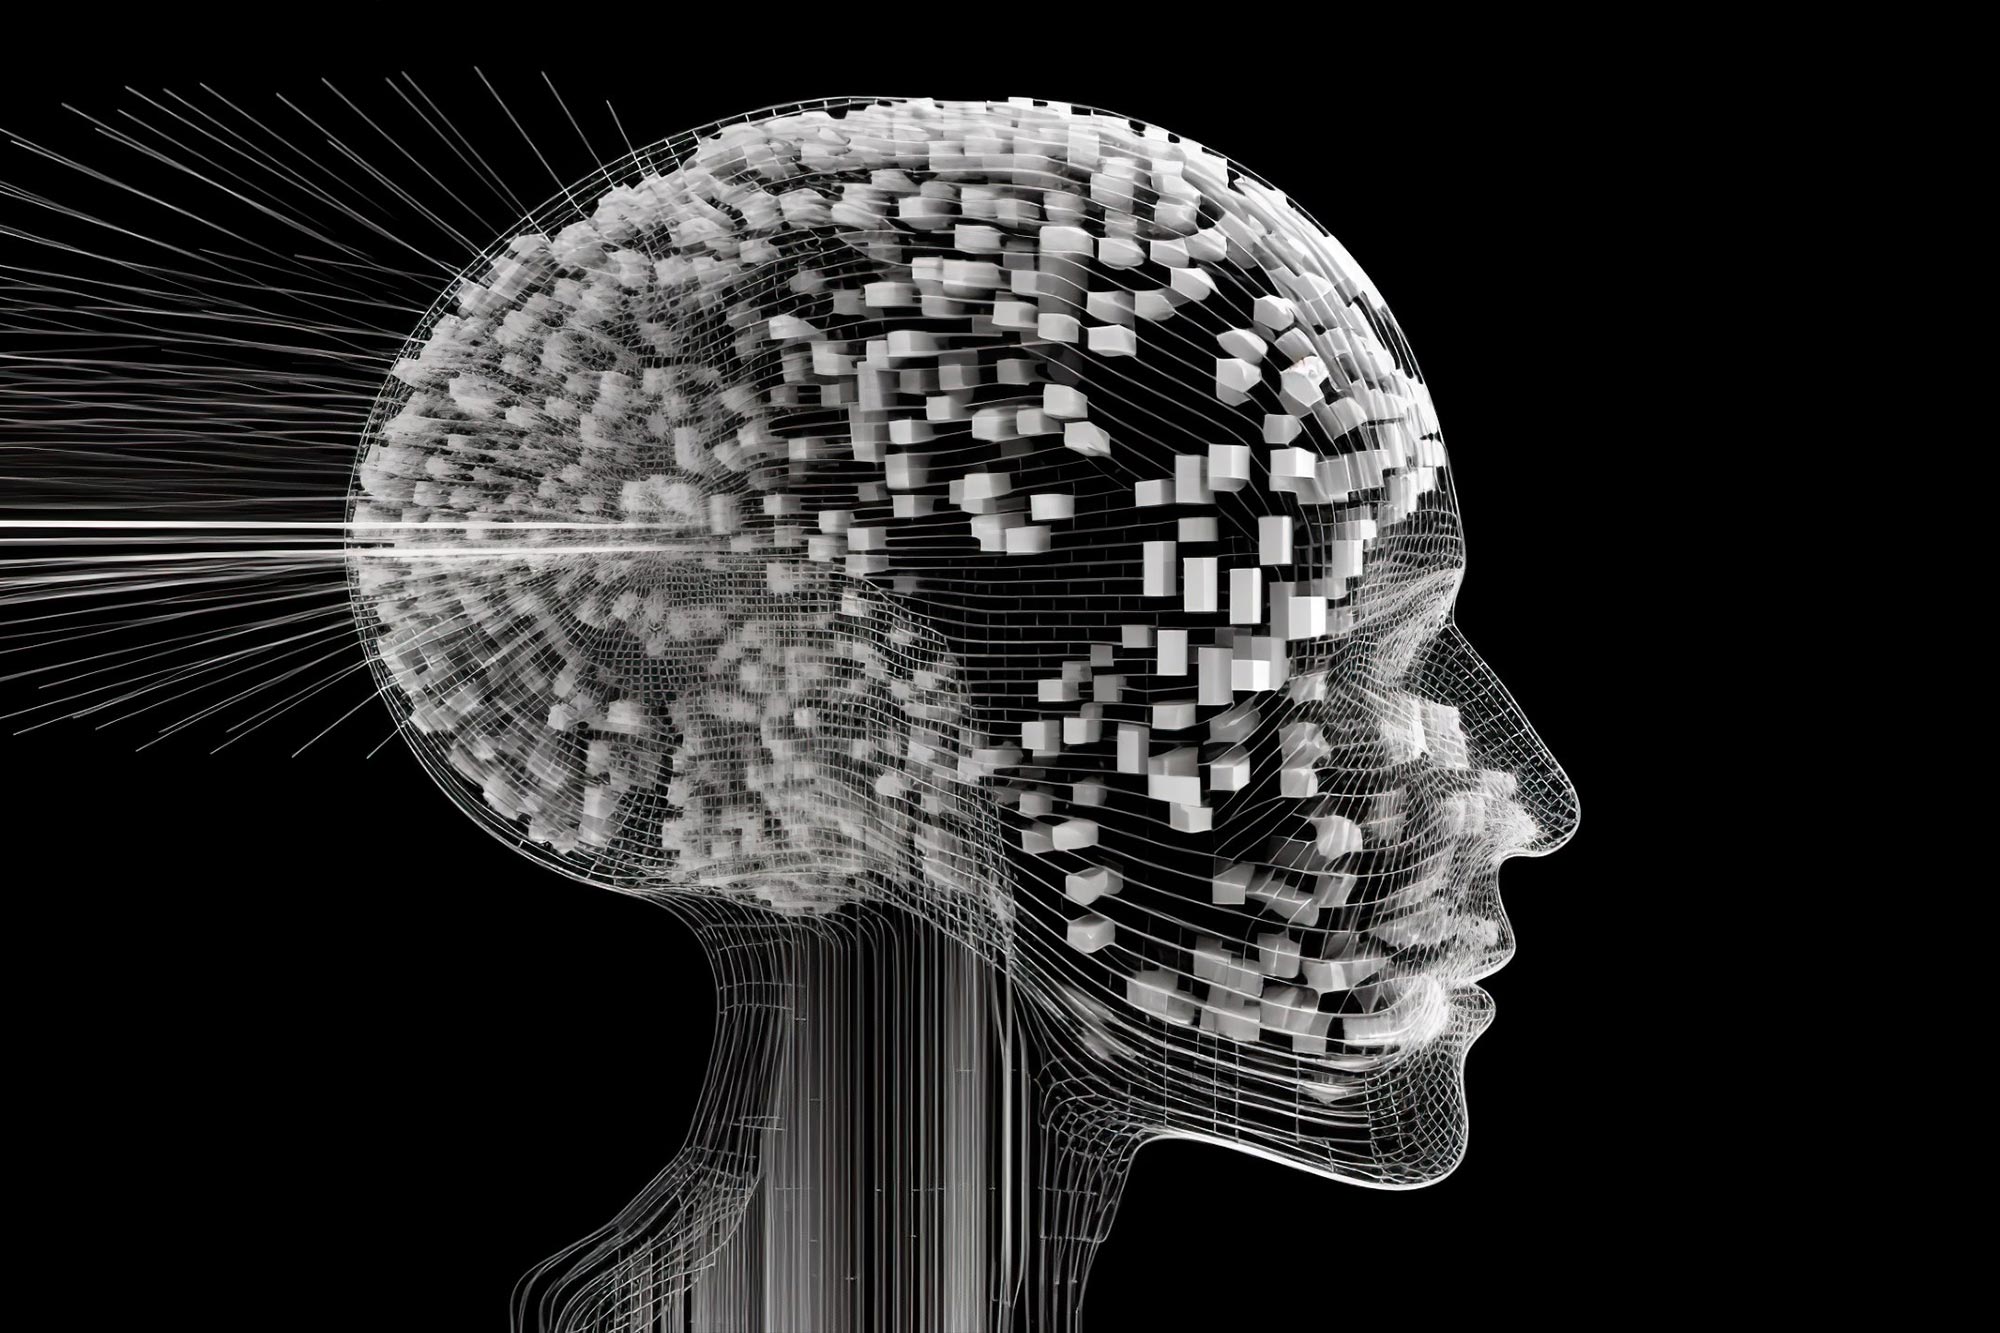 How Can the Human Brain Compete With Artificial Intelligence?